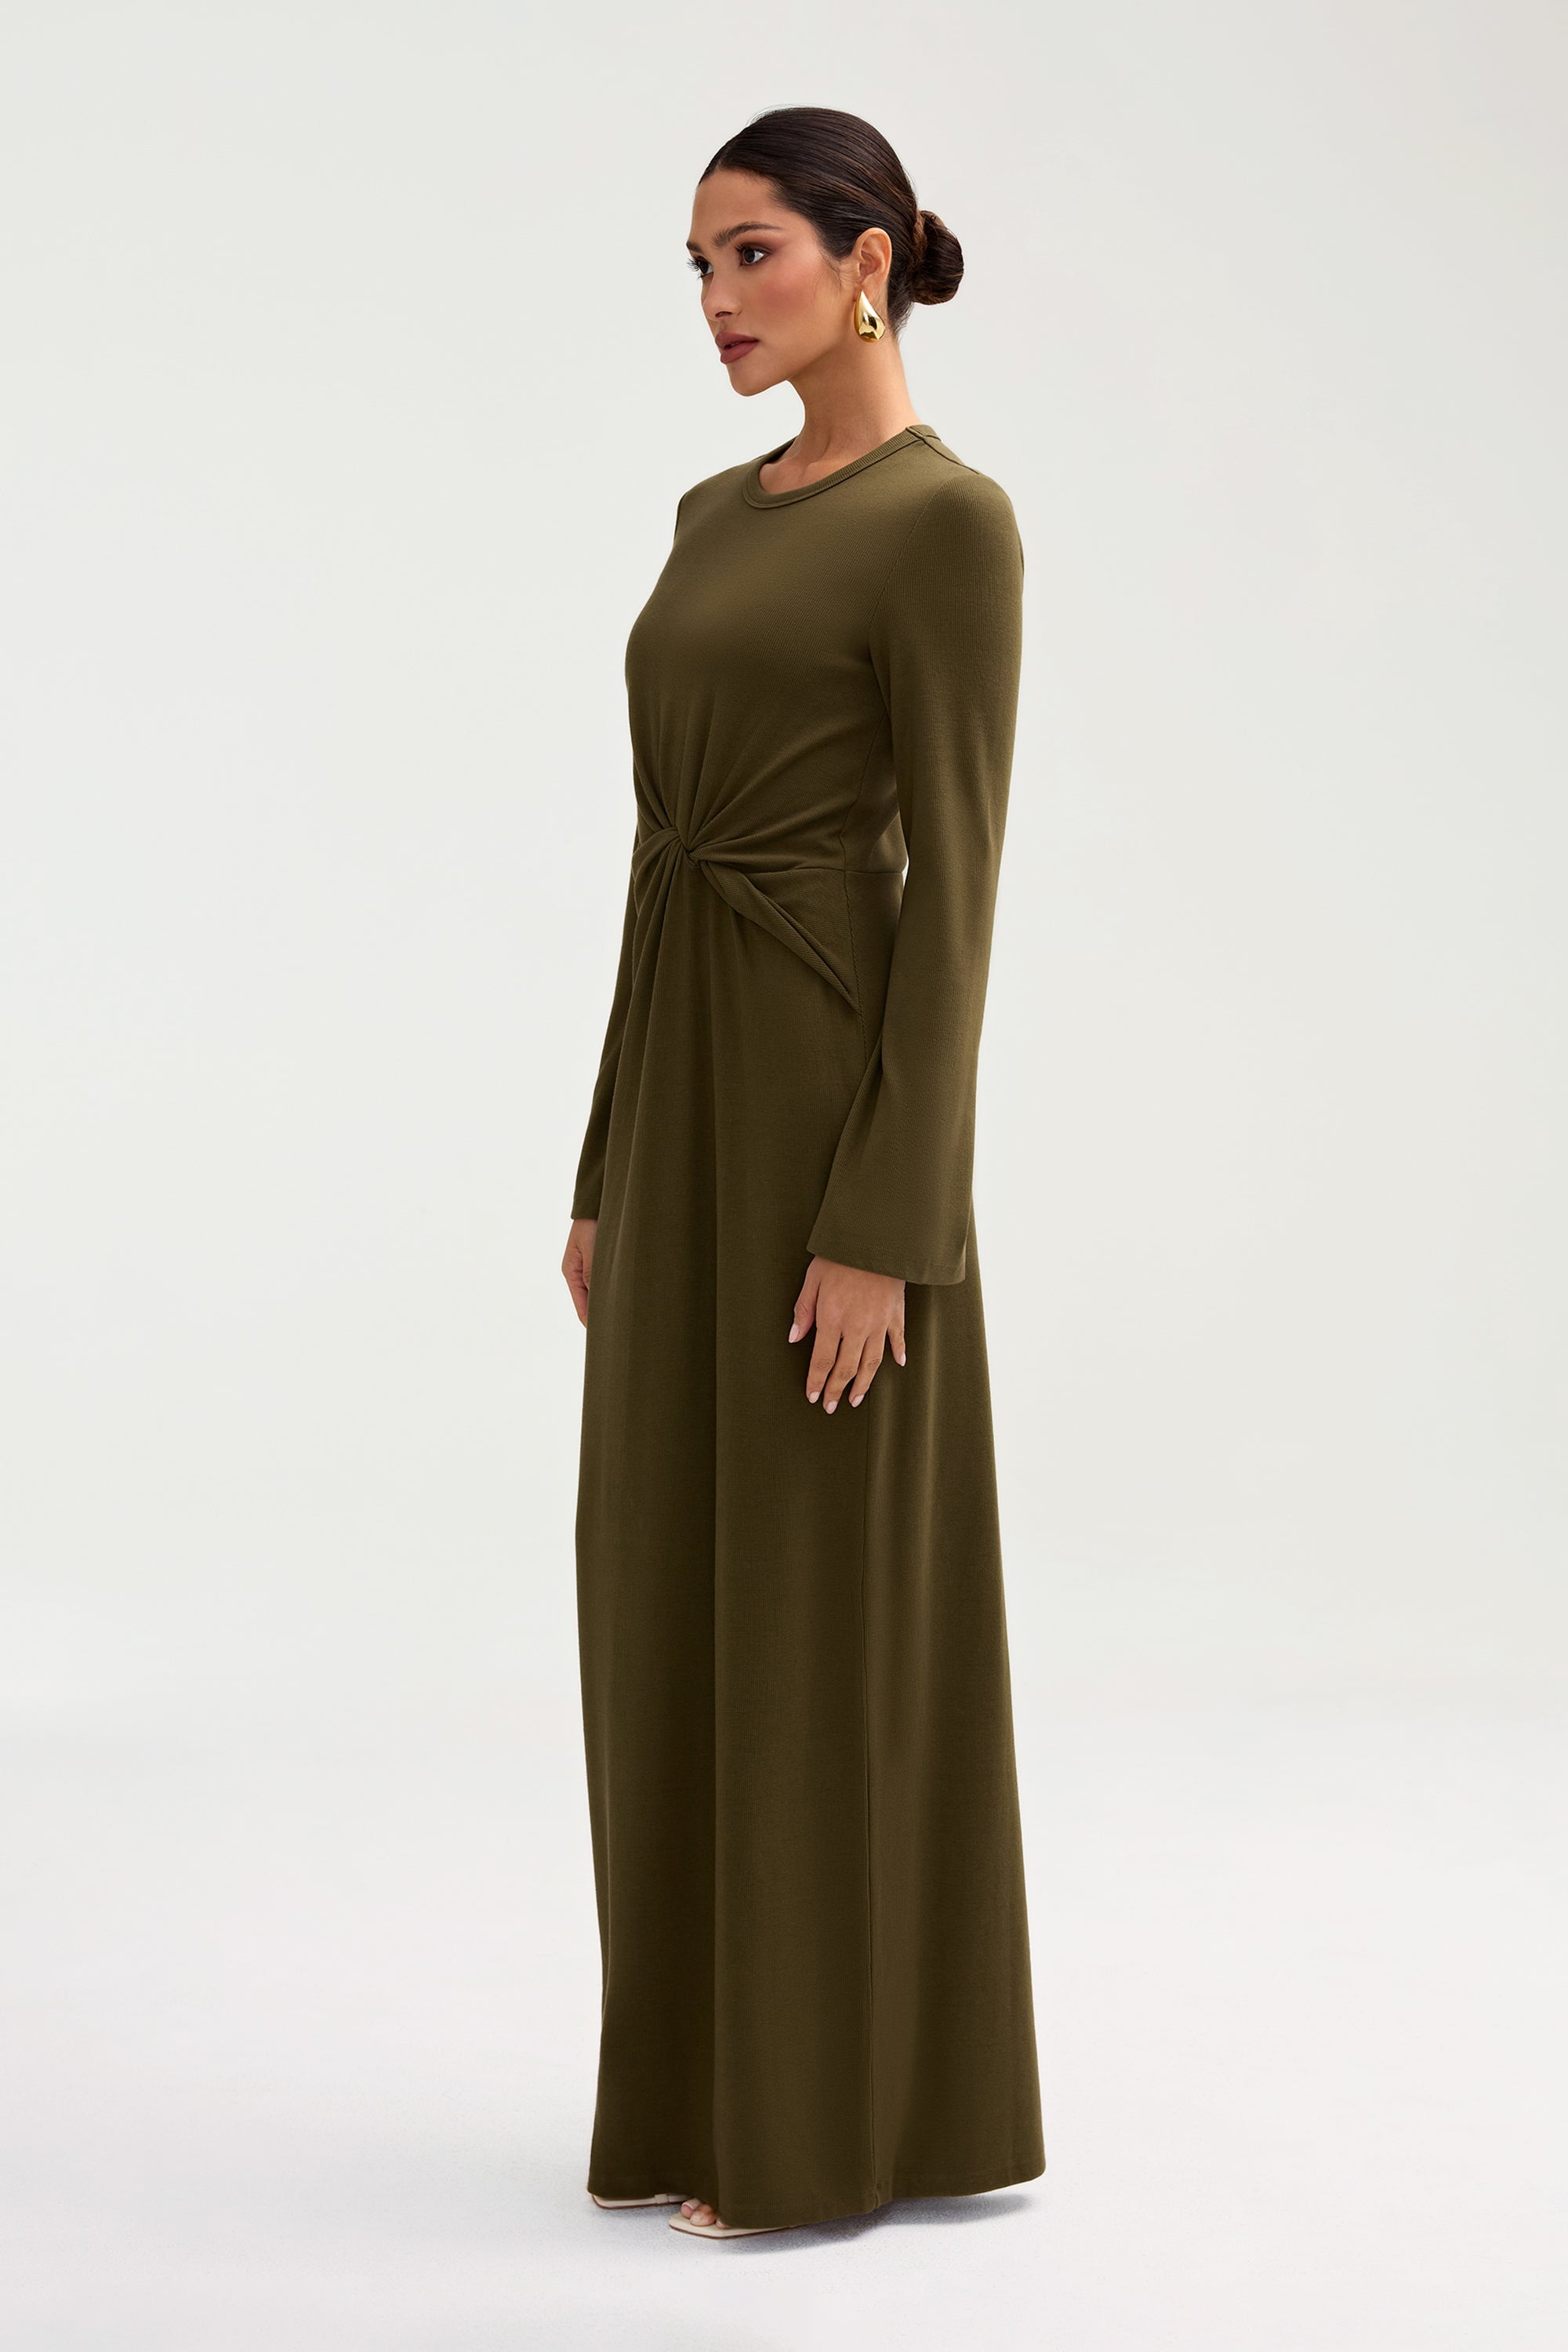 Aissia Ribbed Twist Front Maxi Dress - Olive Night Clothing epschoolboard 